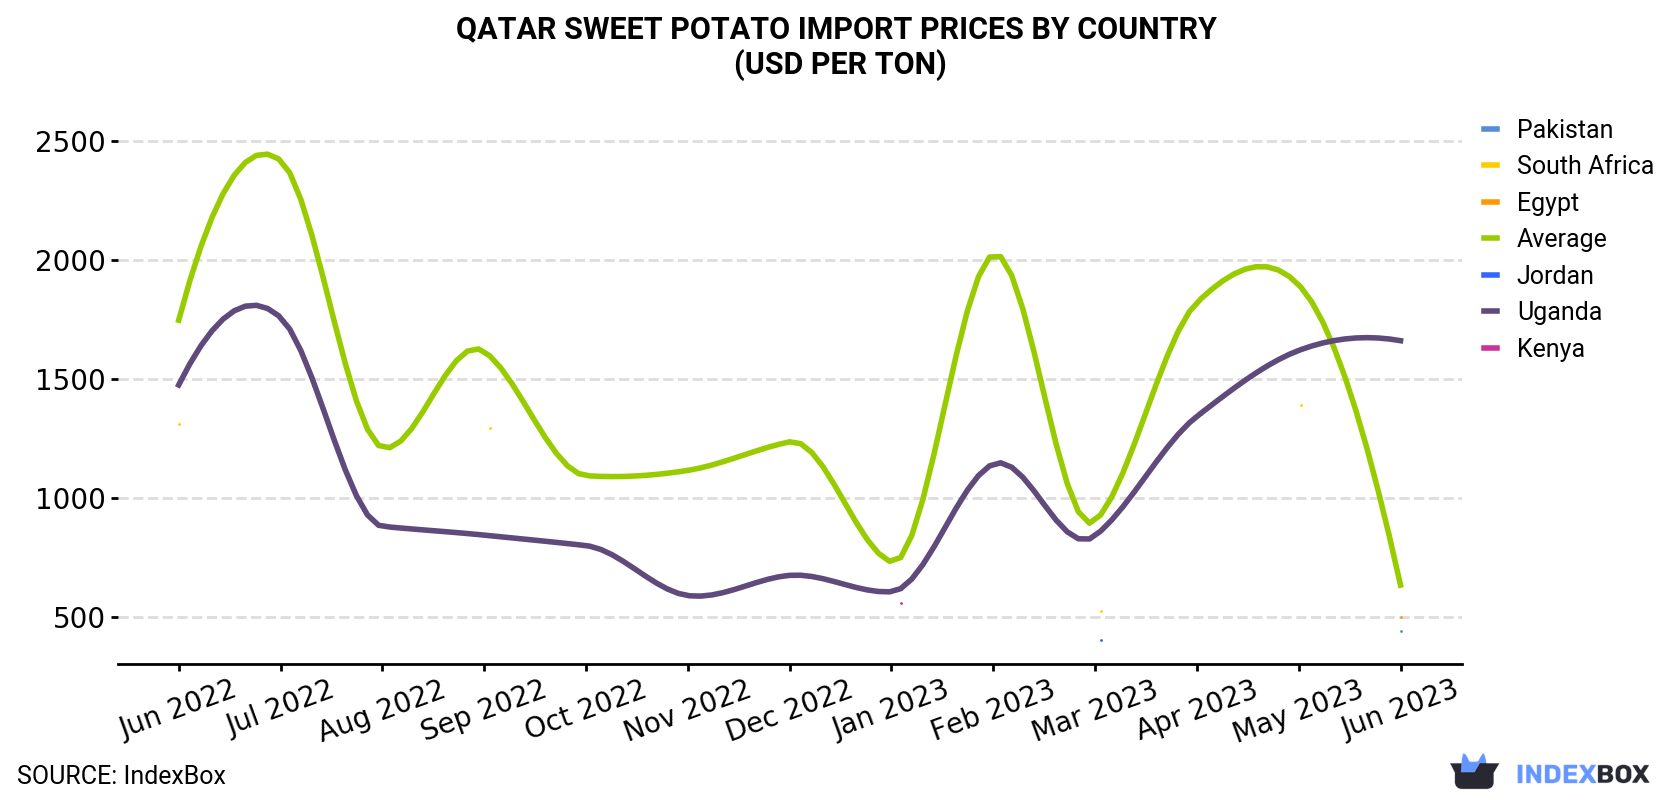 Qatar Sweet Potato Import Prices By Country (USD Per Ton)